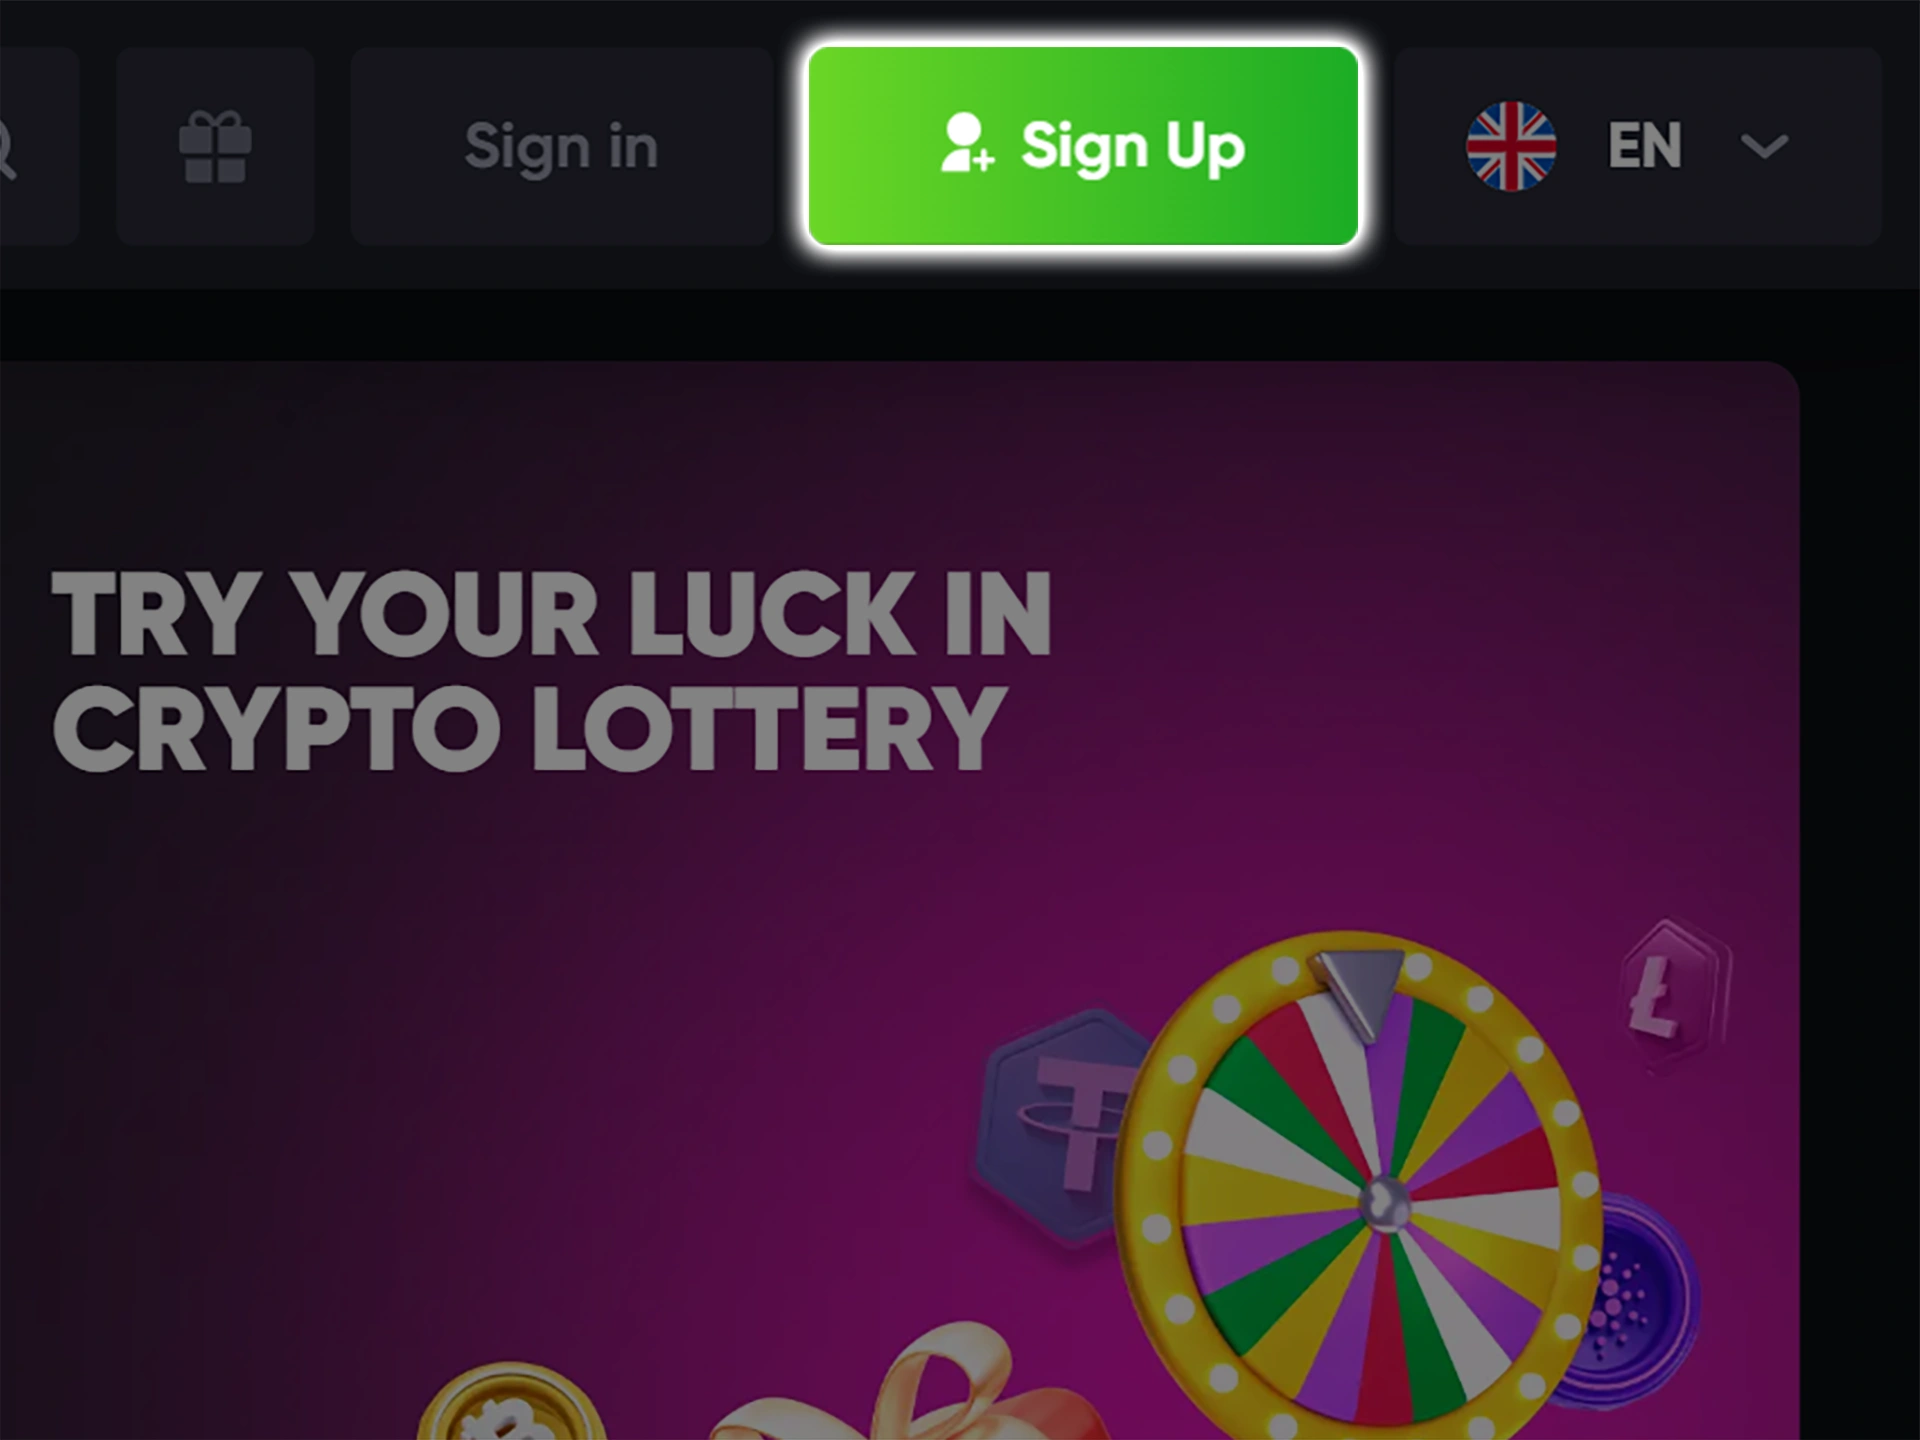 To start registering at Richy Bet, click on the sign up button.